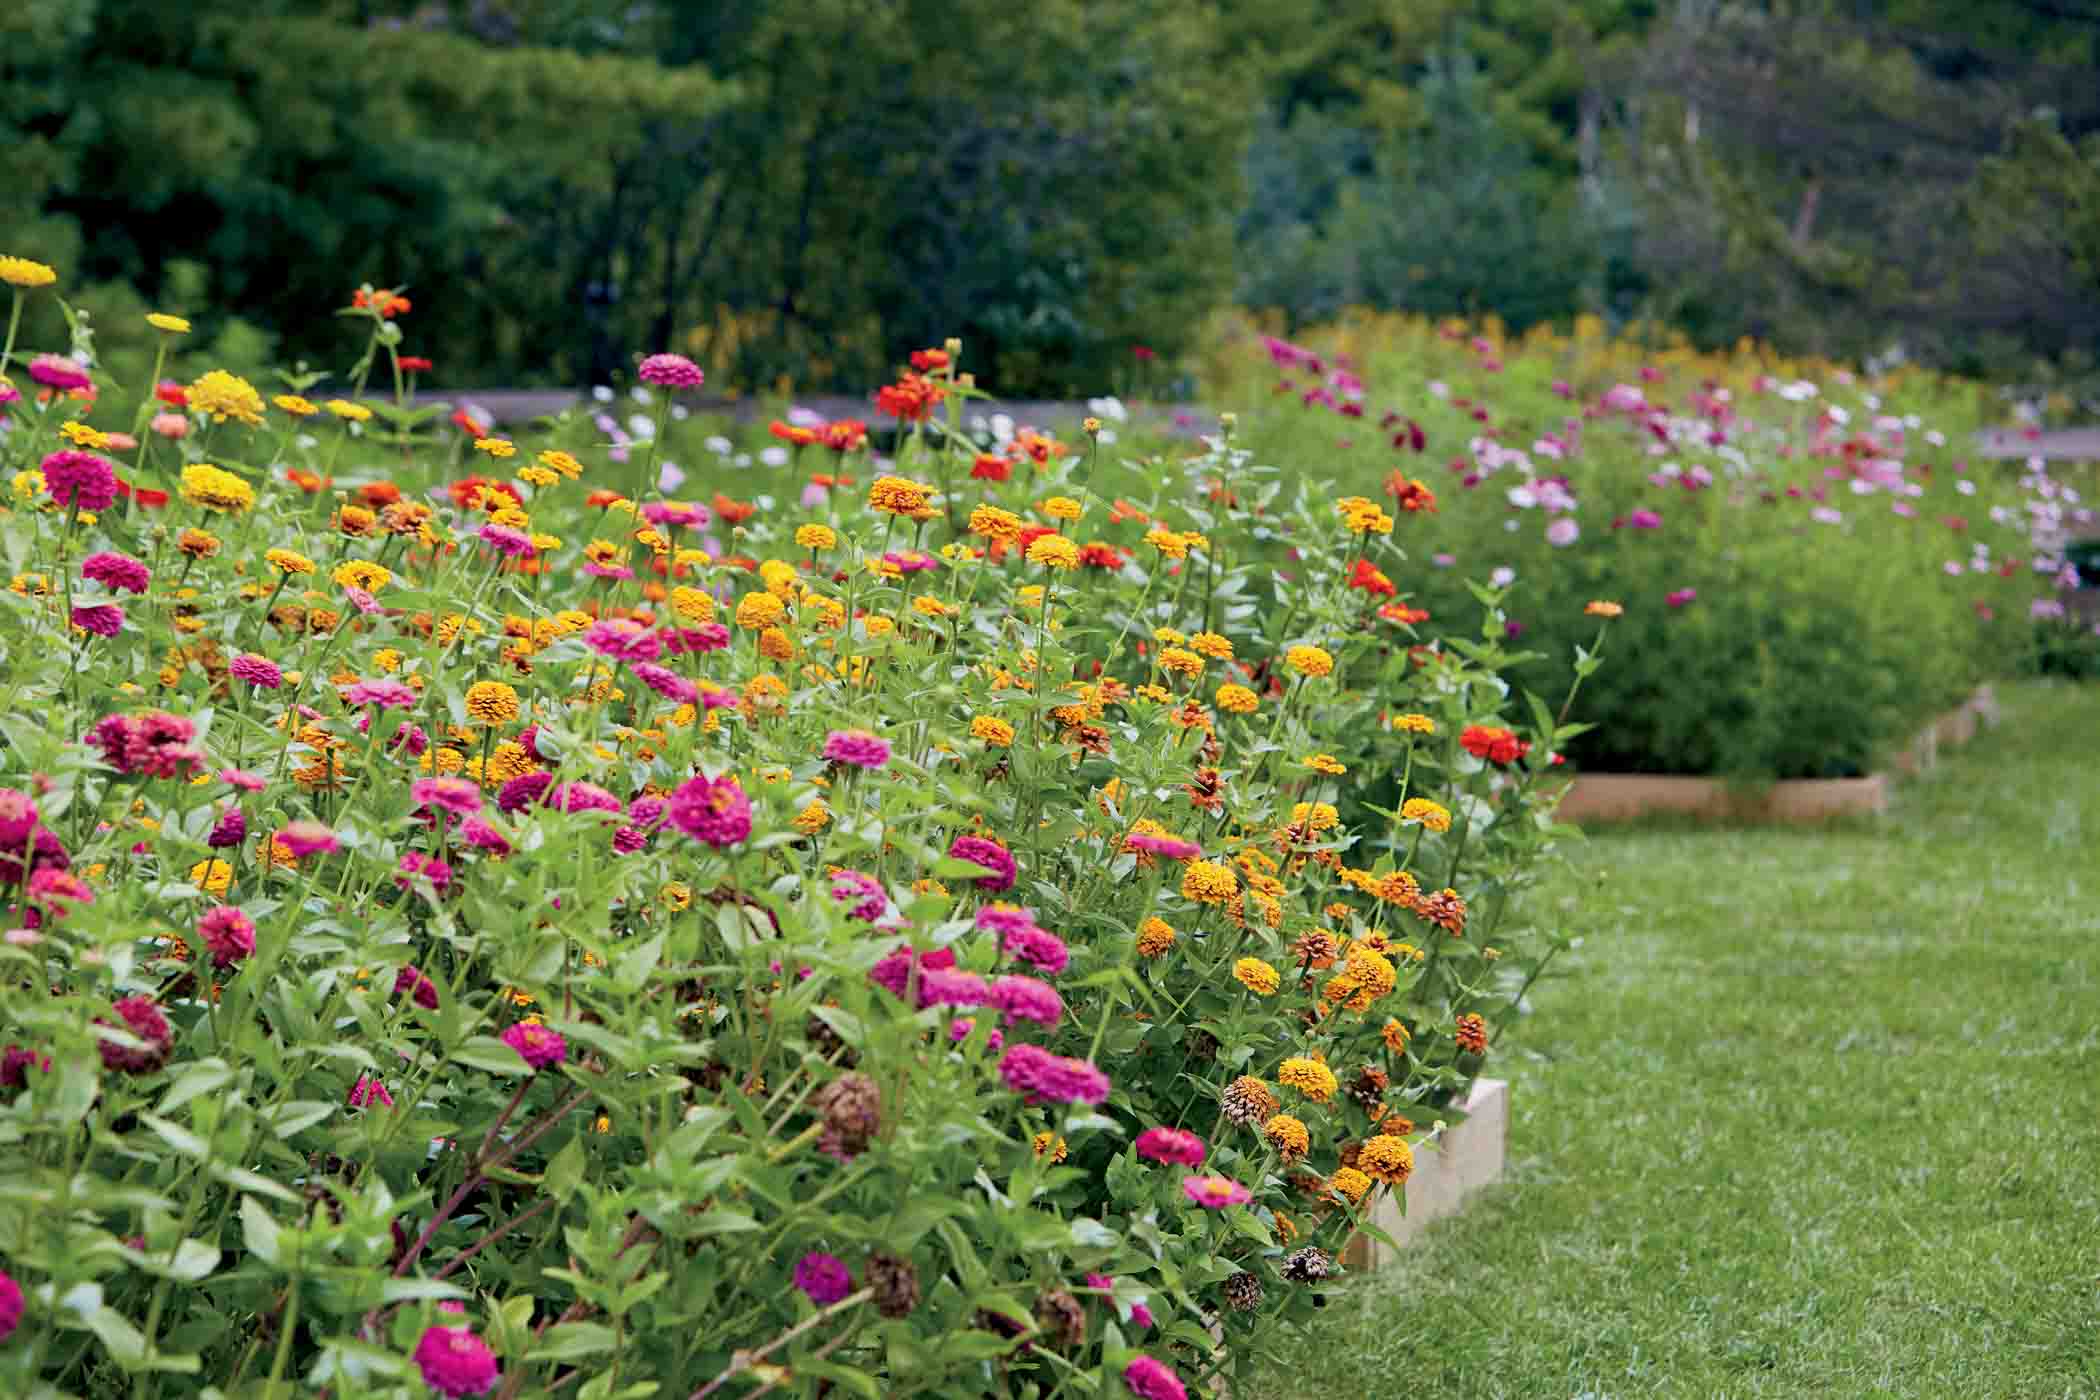 48 Bc2023 04 002 Lush Varieties Of Flowers Awaiting To Be Picked At Barrington's Beautiful Pick Your Own Flower Farm, Little Ducky Farm